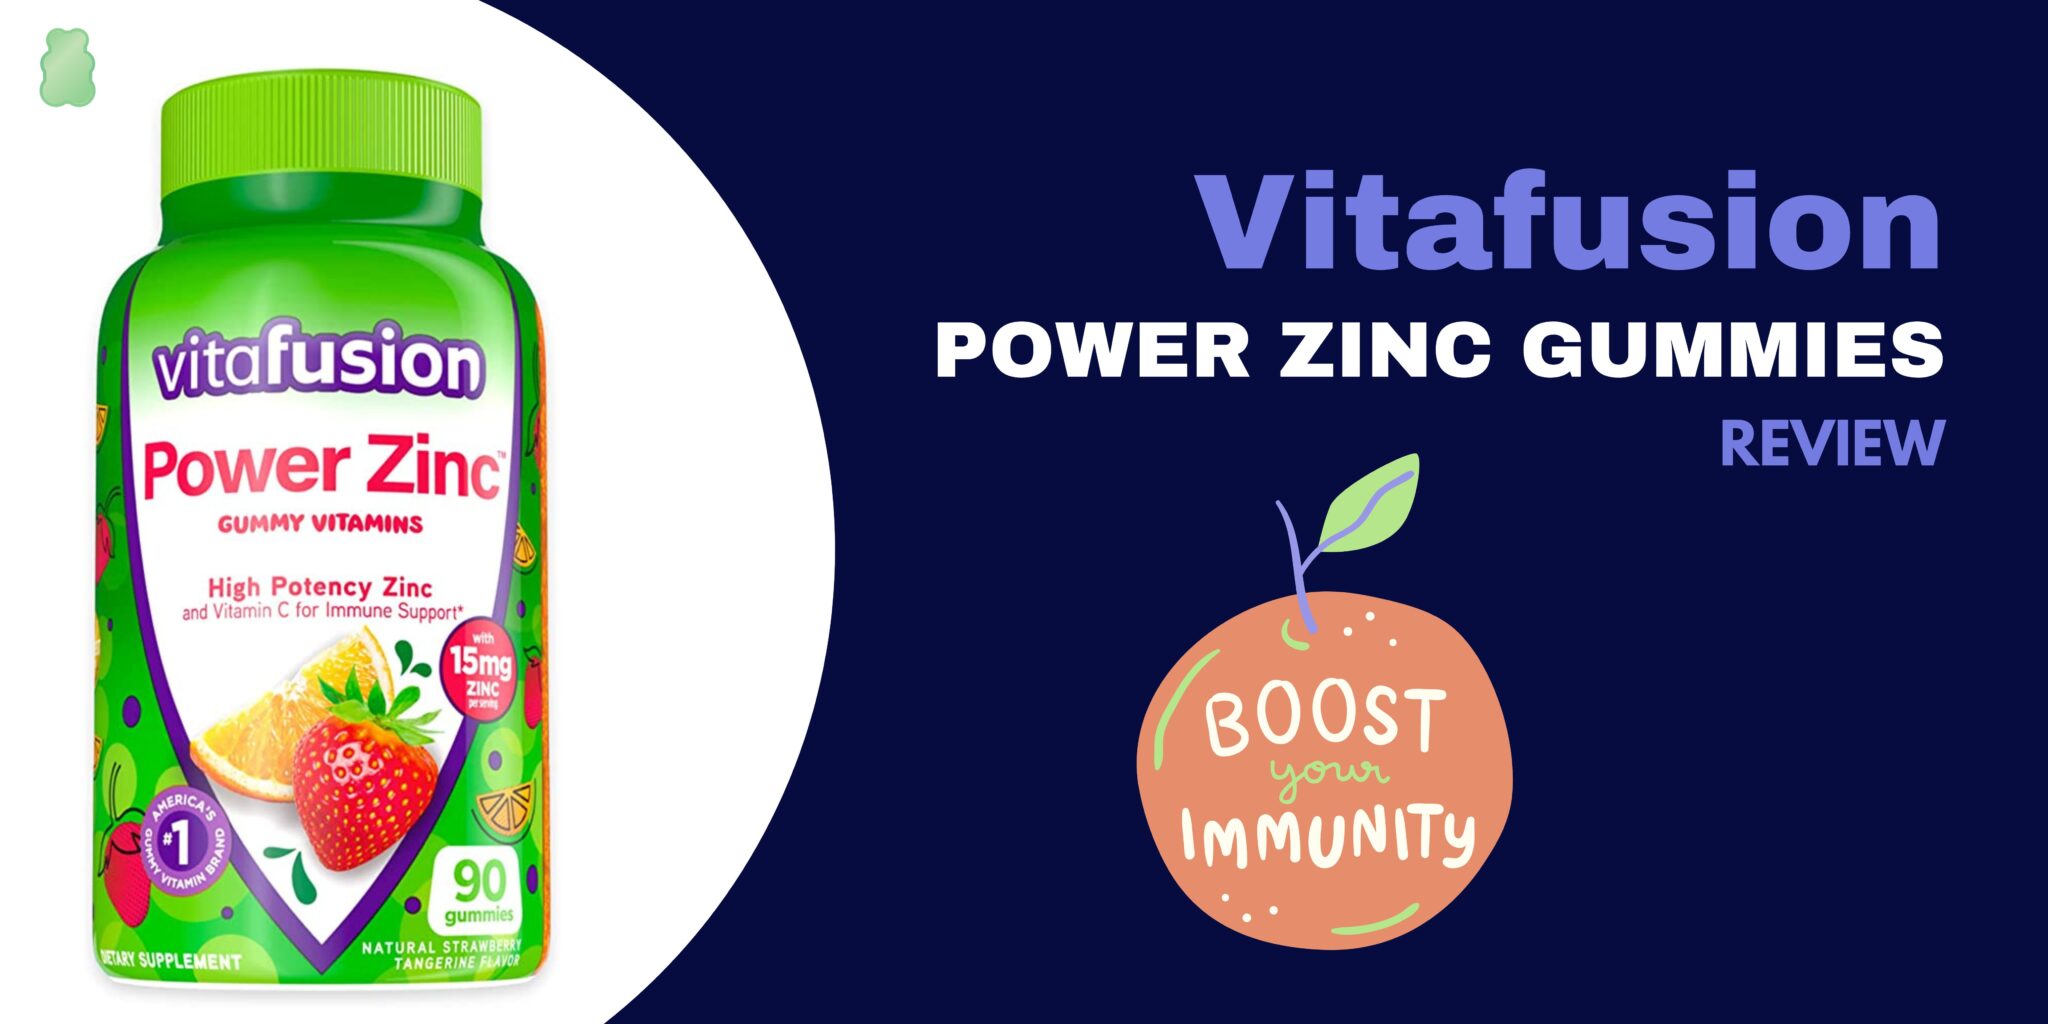 VitaFusion Power Zinc gummies Review in 2023 (After 60 Days)